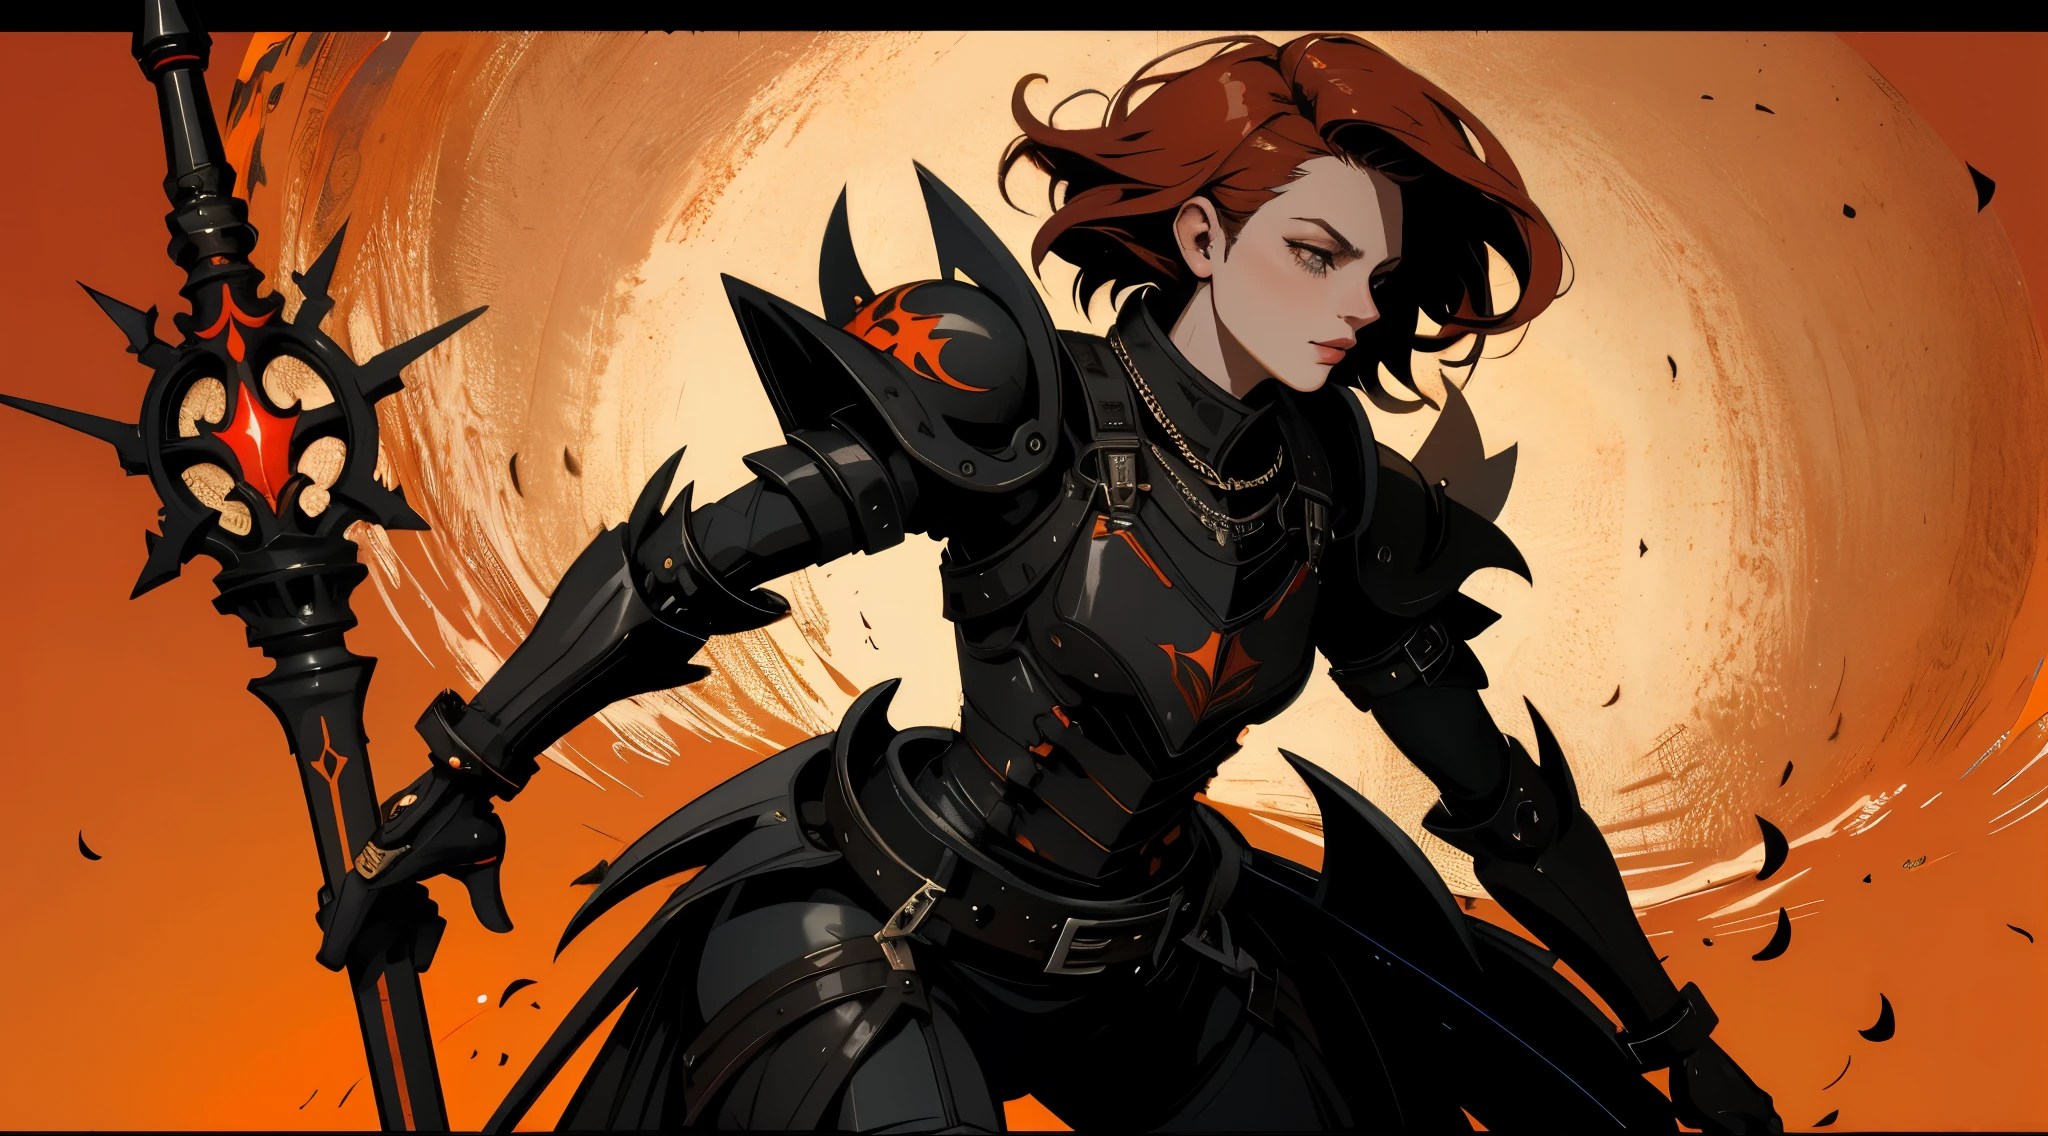 Defining the type of work: Wallpaper;
Background definition: background with black, gray, orange and red colors;
Foreground definition: A woman, with short red hair, dressed in armor, and with a sword, body covered by armor;
Quality definition and effects: Very detailed, spring effect, lens effect, 16k quality